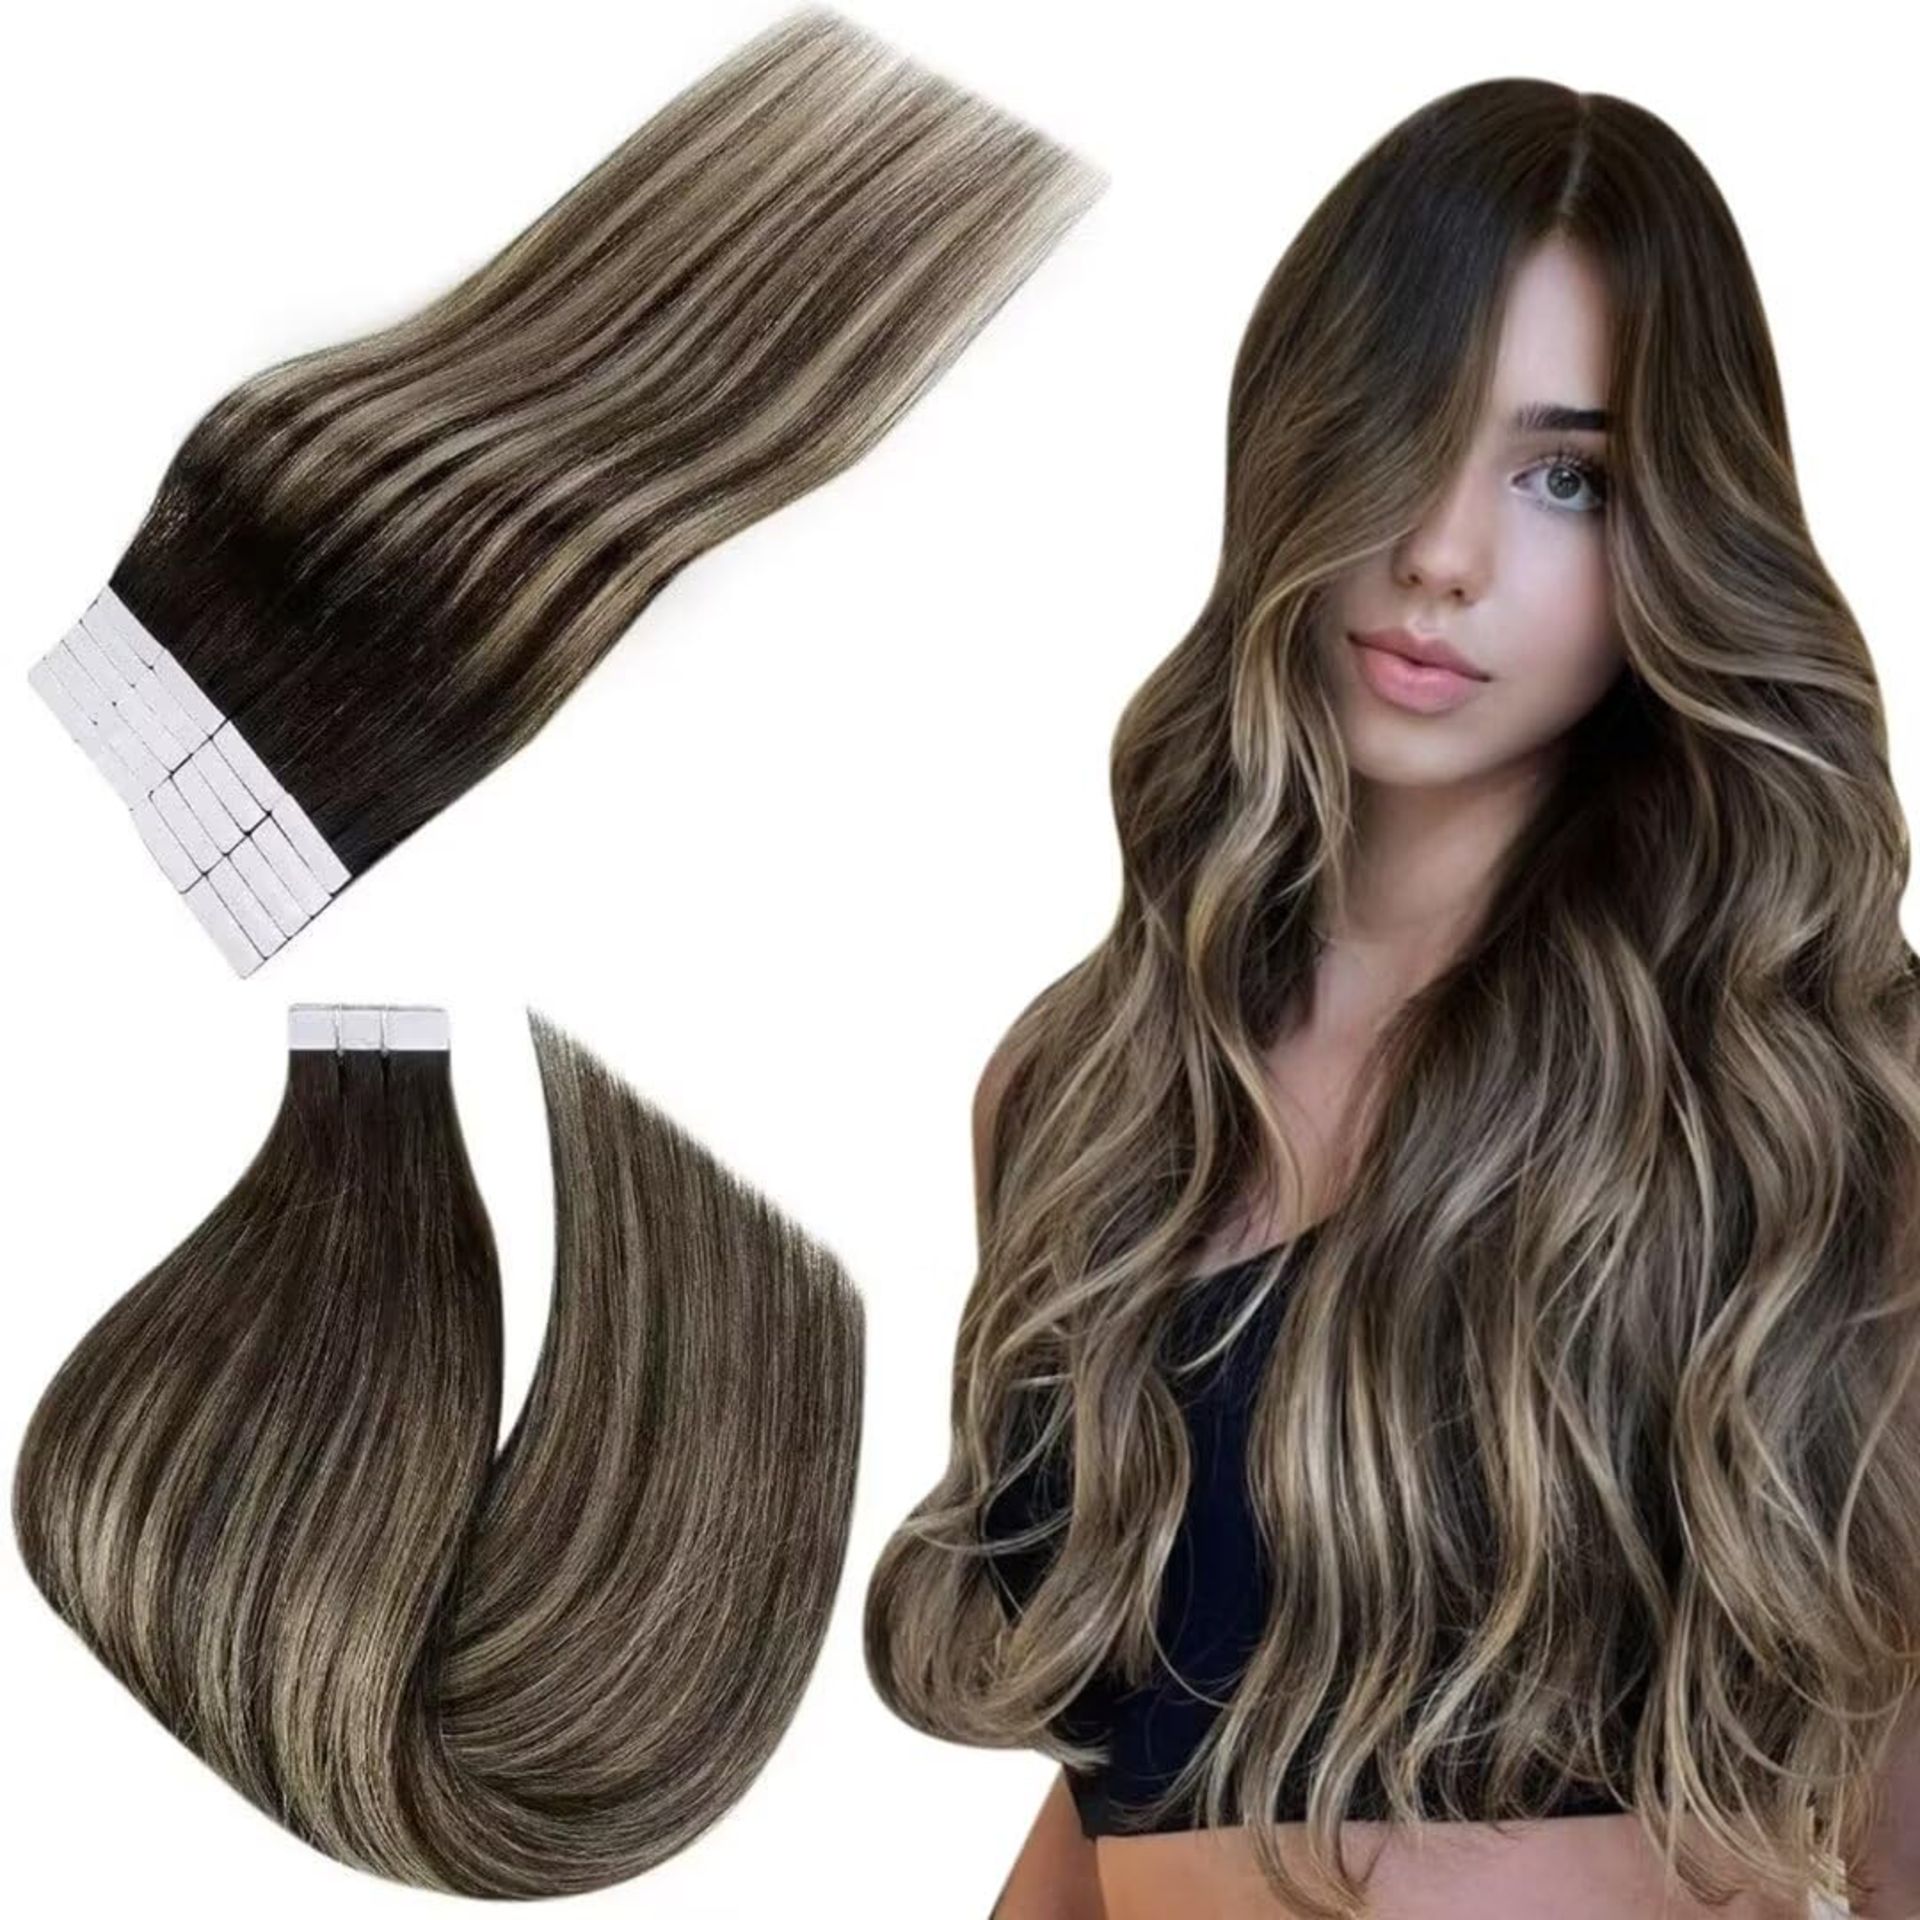 RRP £44.44 Easyouth Tape in Human Hair Extensions Black Balayage - Image 2 of 3